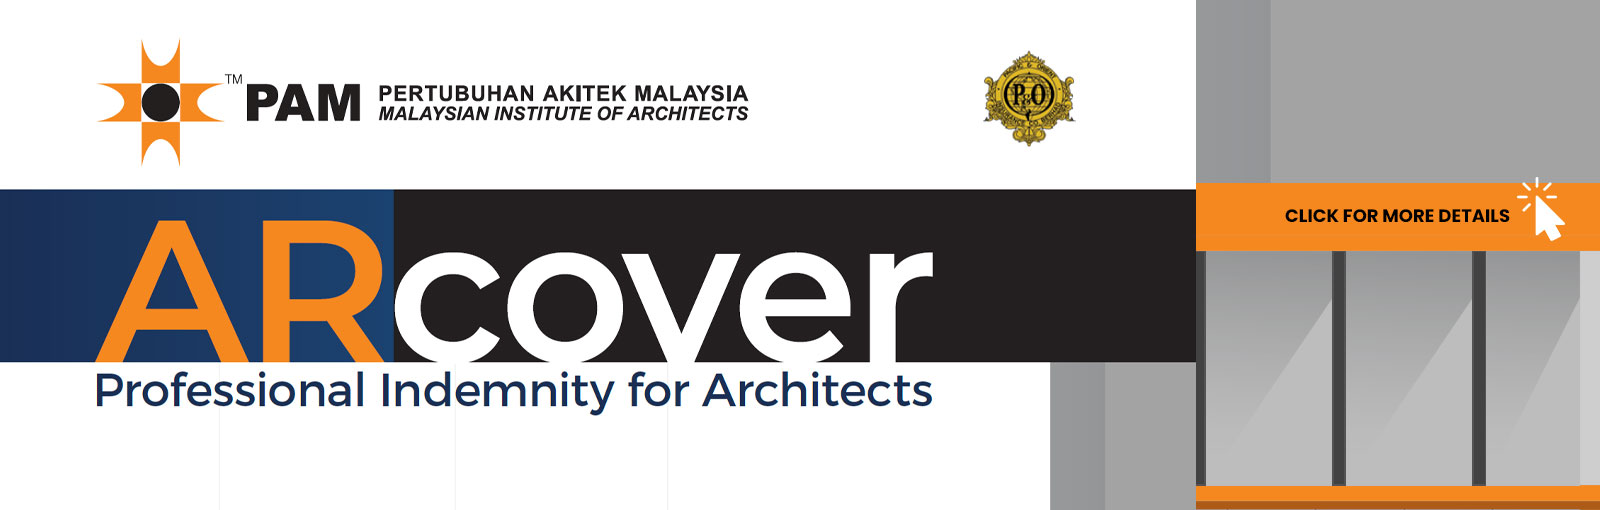 ARcover - Professional Indemnity for Architects